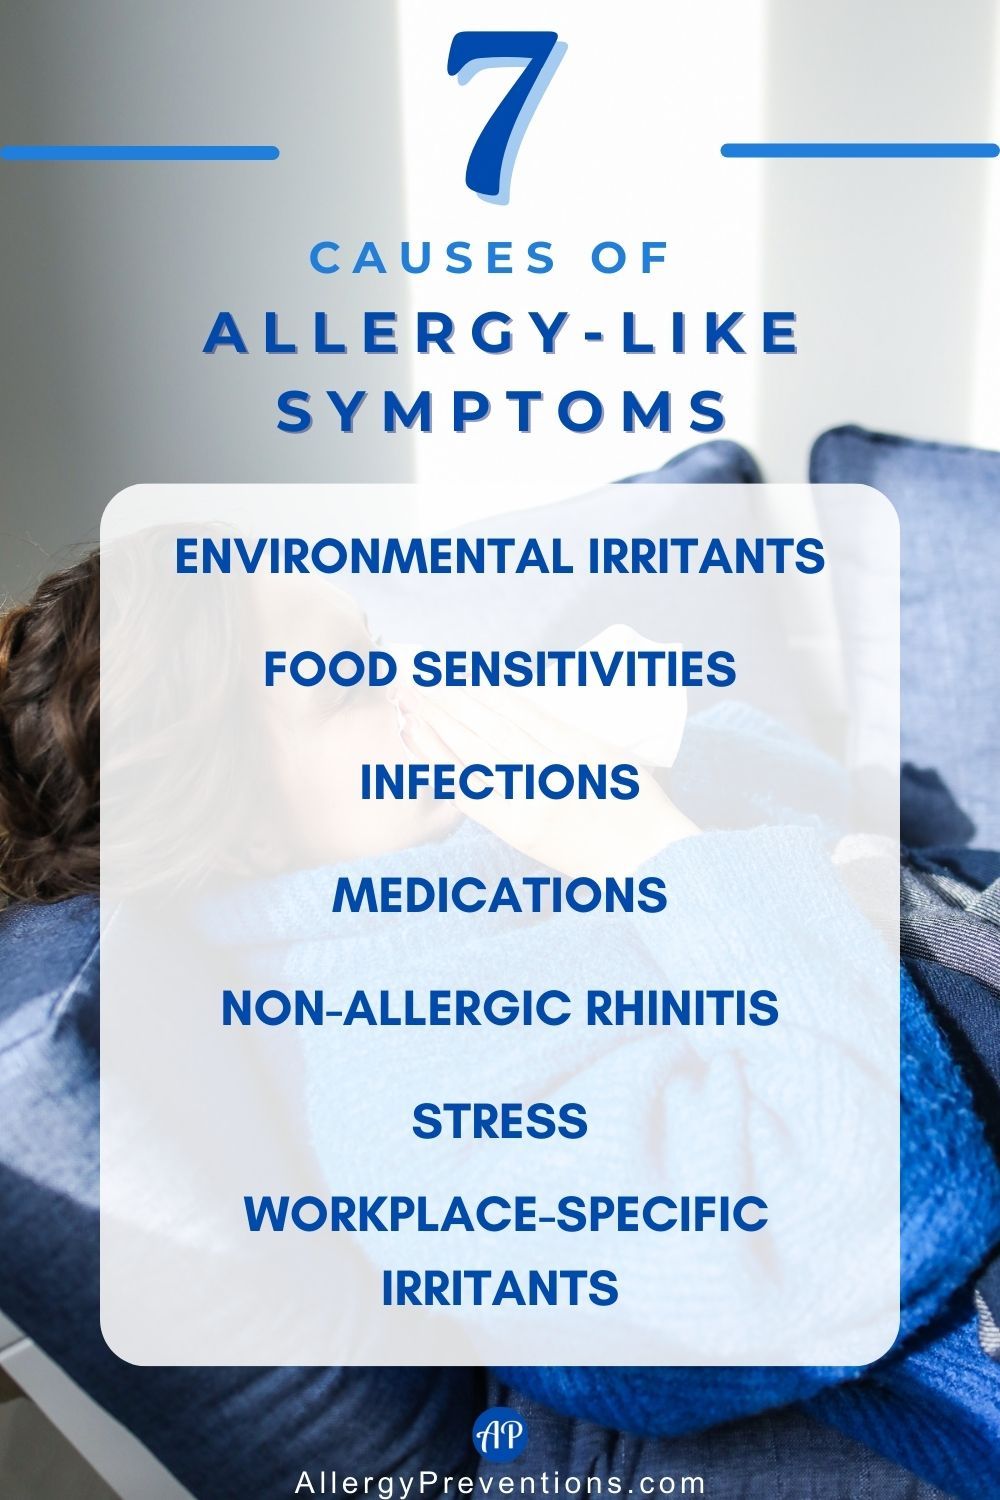 causes of allergy-like symptoms infographic. Here is a list of possible reasons for allergy like symptoms: environmental irritants, Food Sensitivities, infections, Medications, Non-Allergic Rhinitis, Stress, Workplace-Specific Irritants